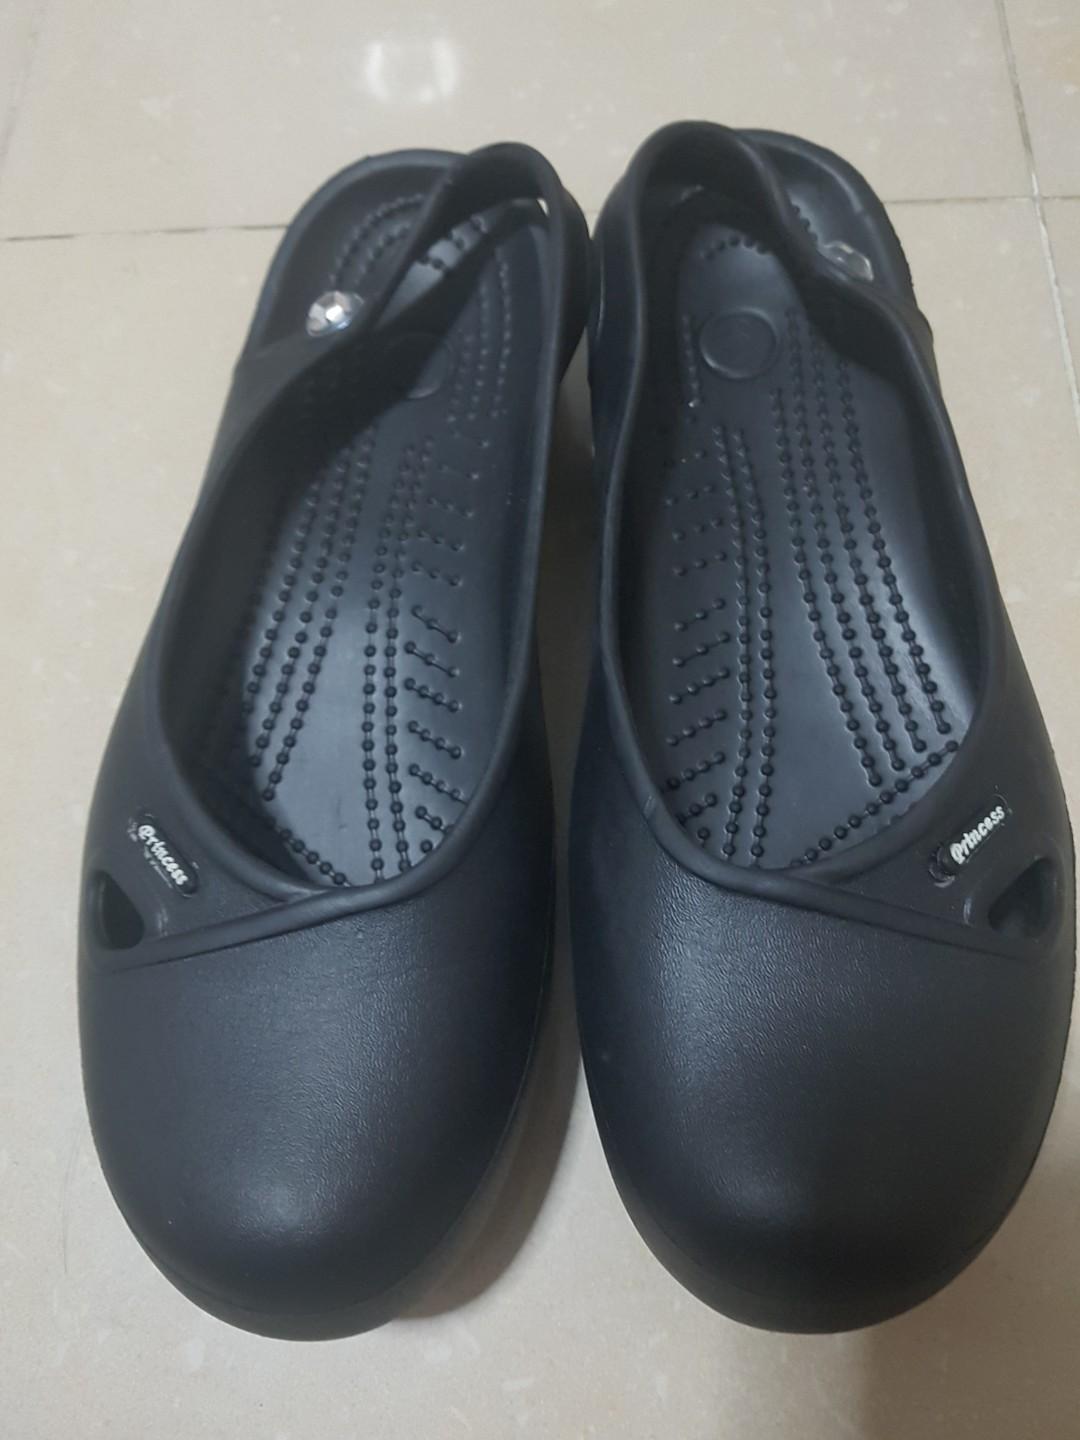 shoes similar to crocs but cheaper